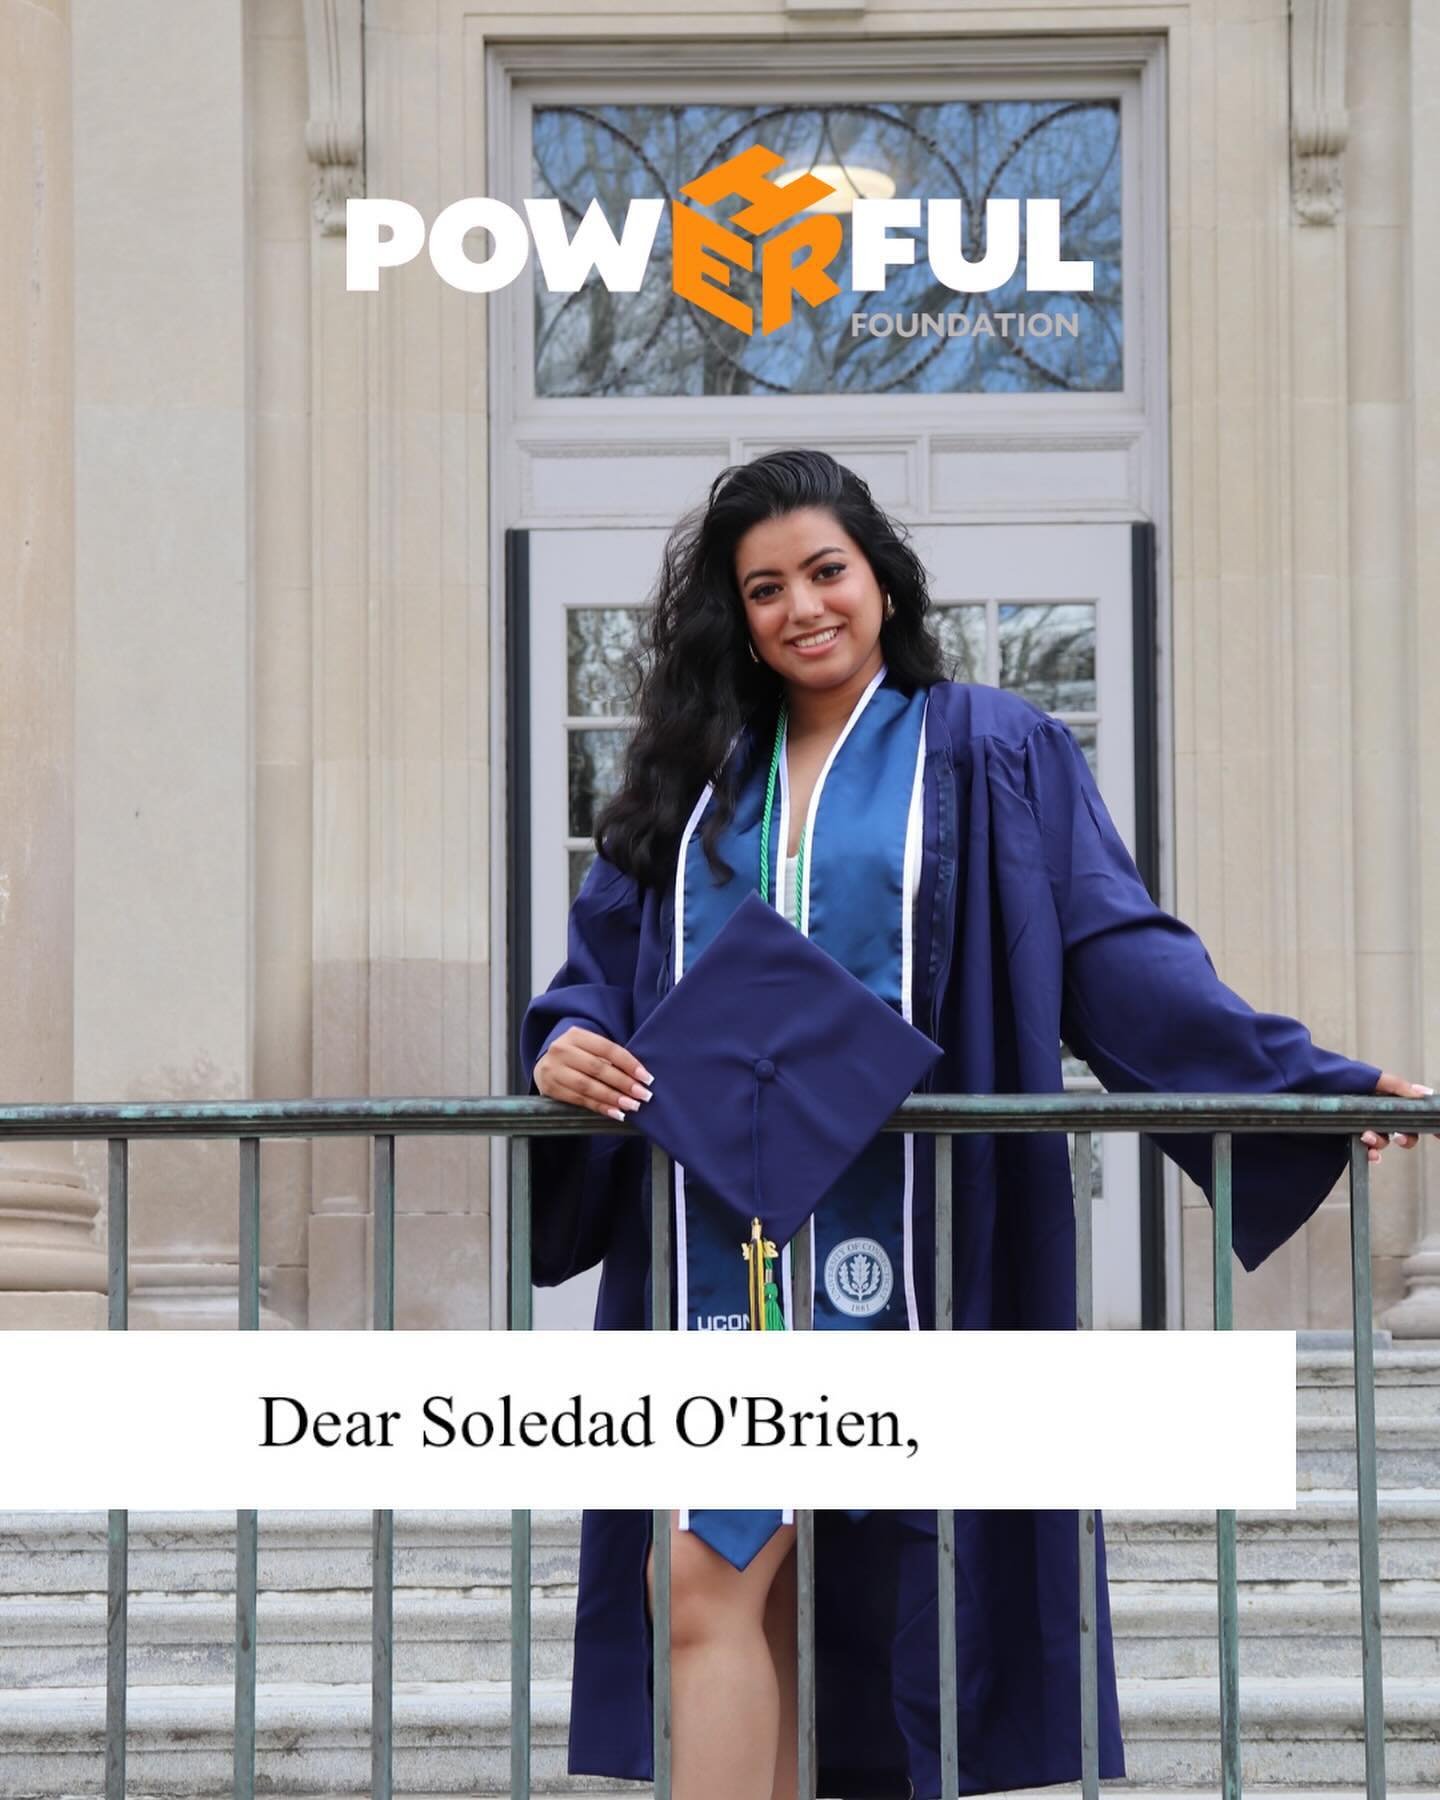 Congratulations to Naina Mirsha for successfully completing her economics degree at the University of Connecticut. 🎓

PowHERful takes great pride in our scholar achievement! Naina has expressed her gratitude for the Foundation through a heartfelt, h